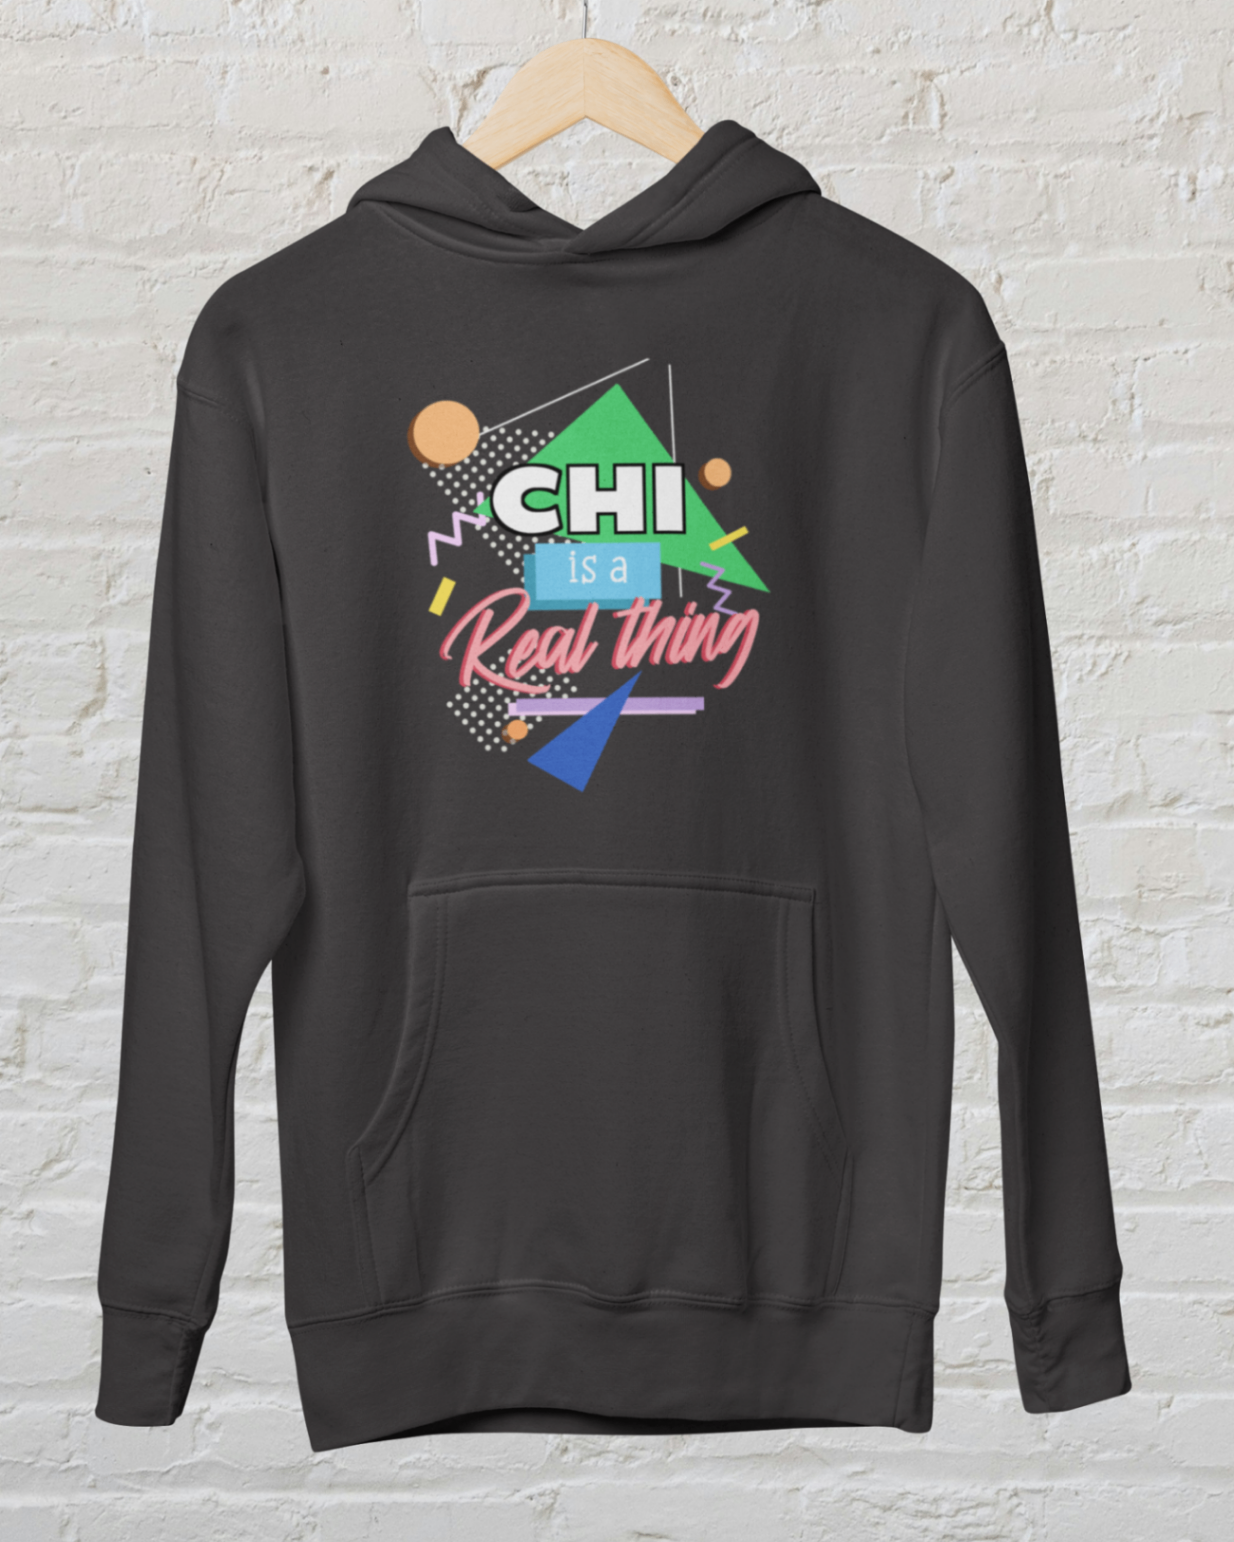 Hoodie black 'chi is a real thing' design white brick backround